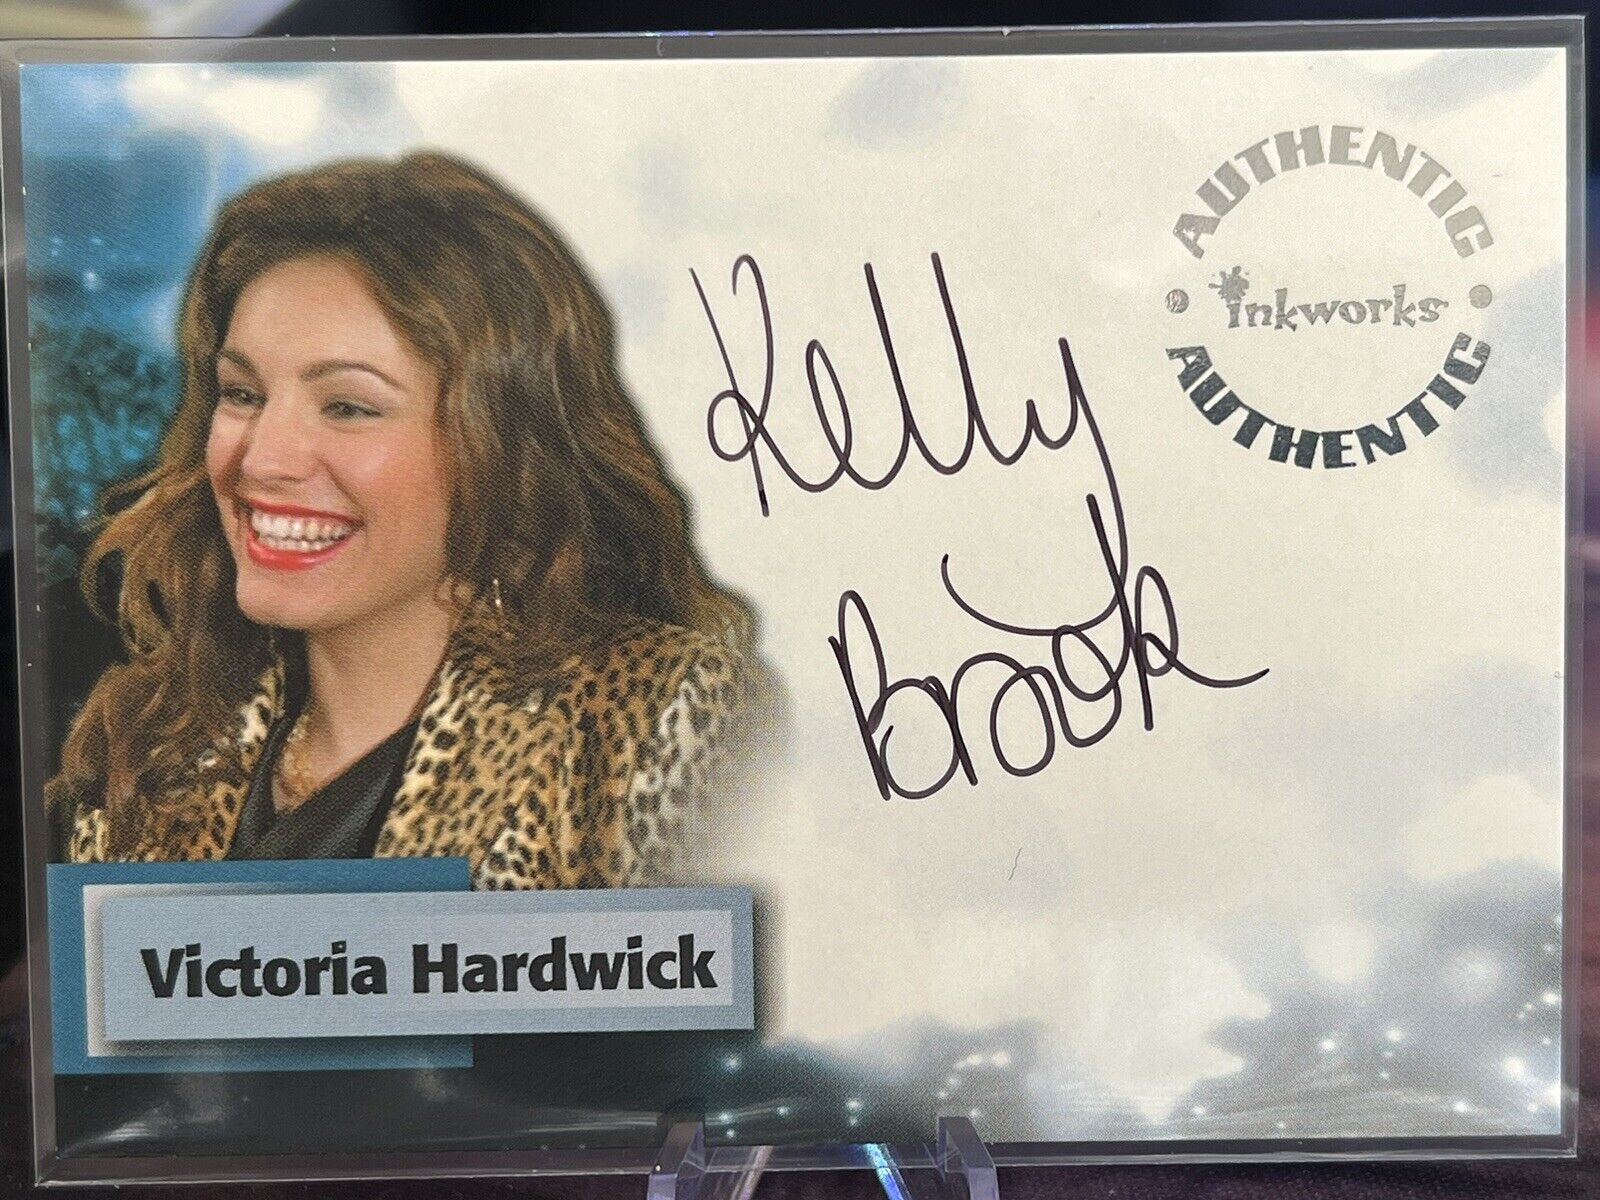 Kelly Brook as Victoria Hardwick Autograph A4 from Smallville, Inkworks